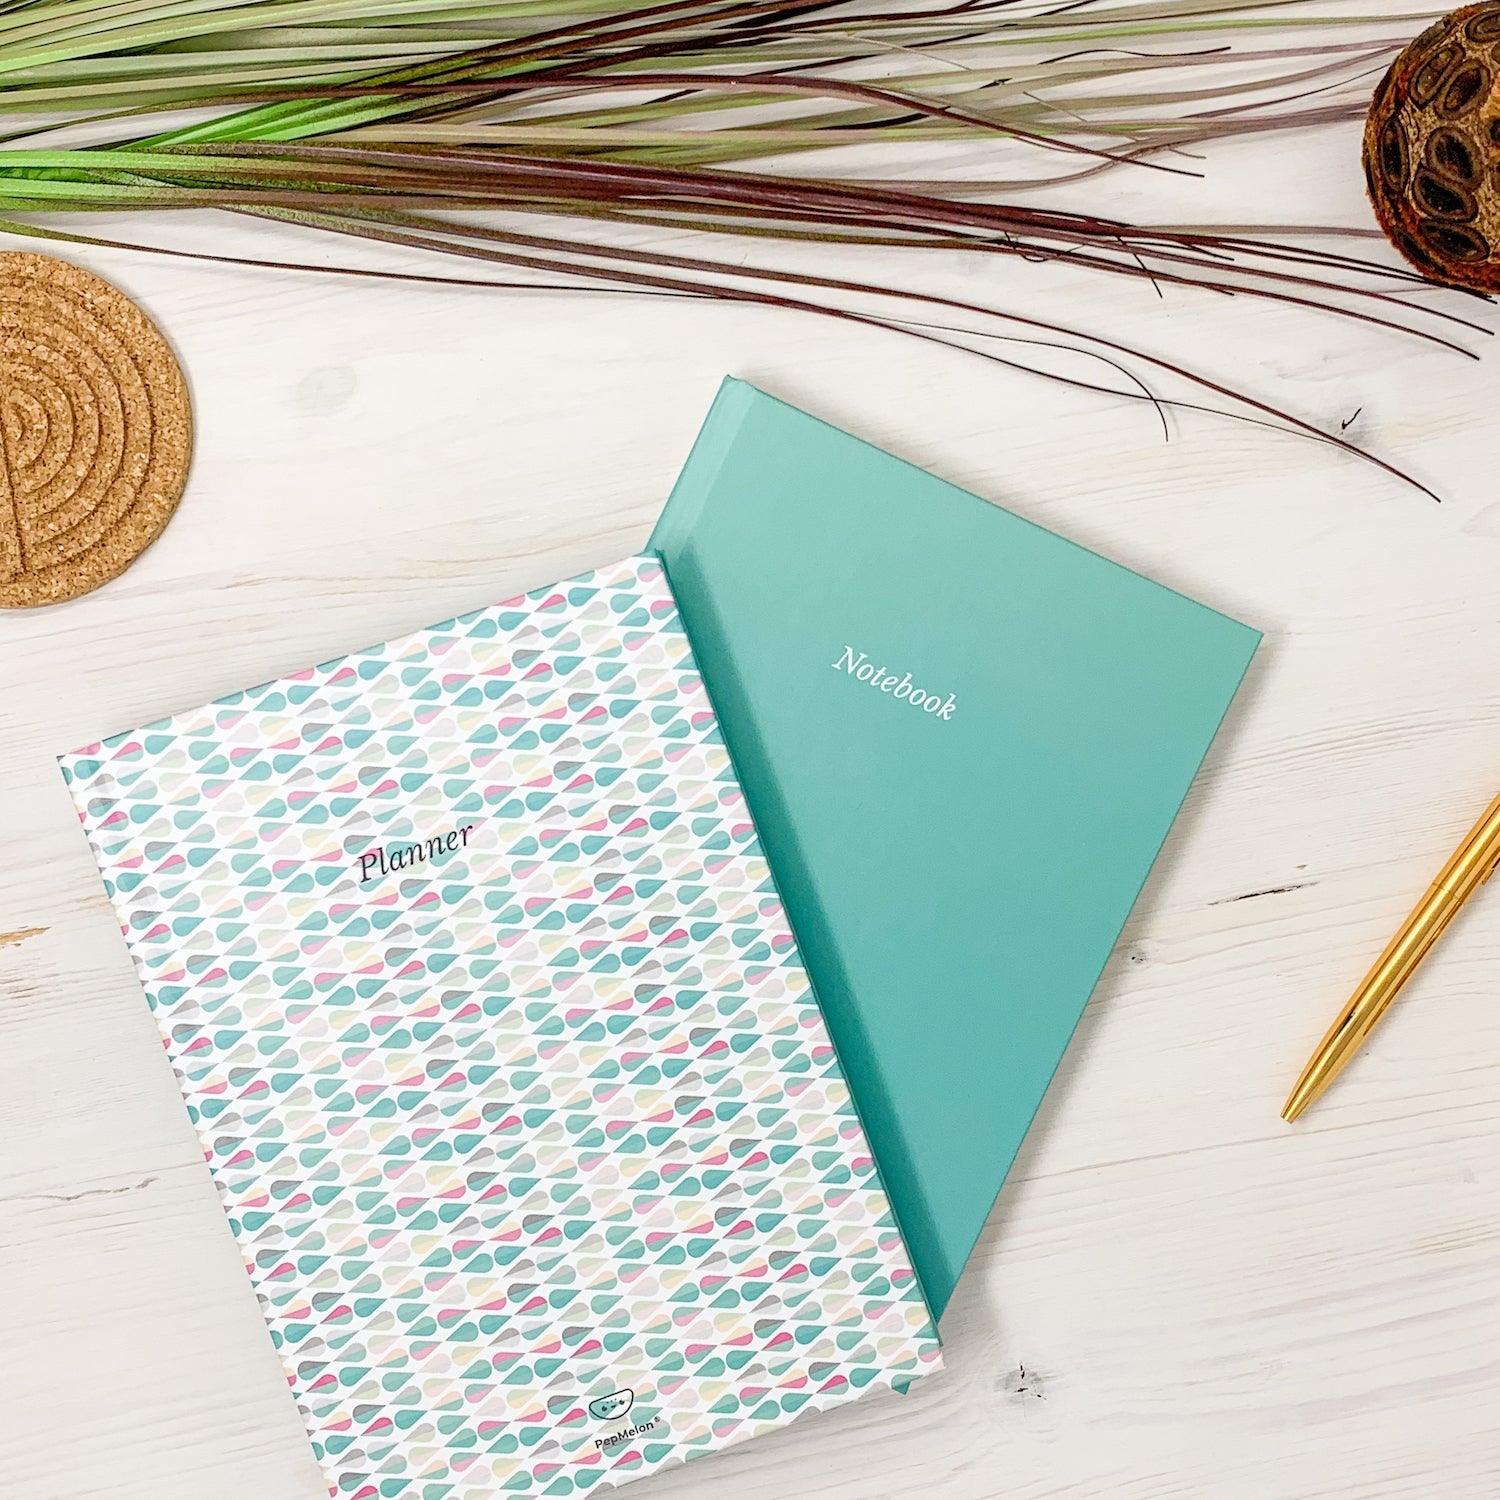 Diary / Notebook &#8211; Turquoise drops, 176 pages, hard cover 2 in 1 Planner and Notebook. Size 15,4 x 21,6 cm